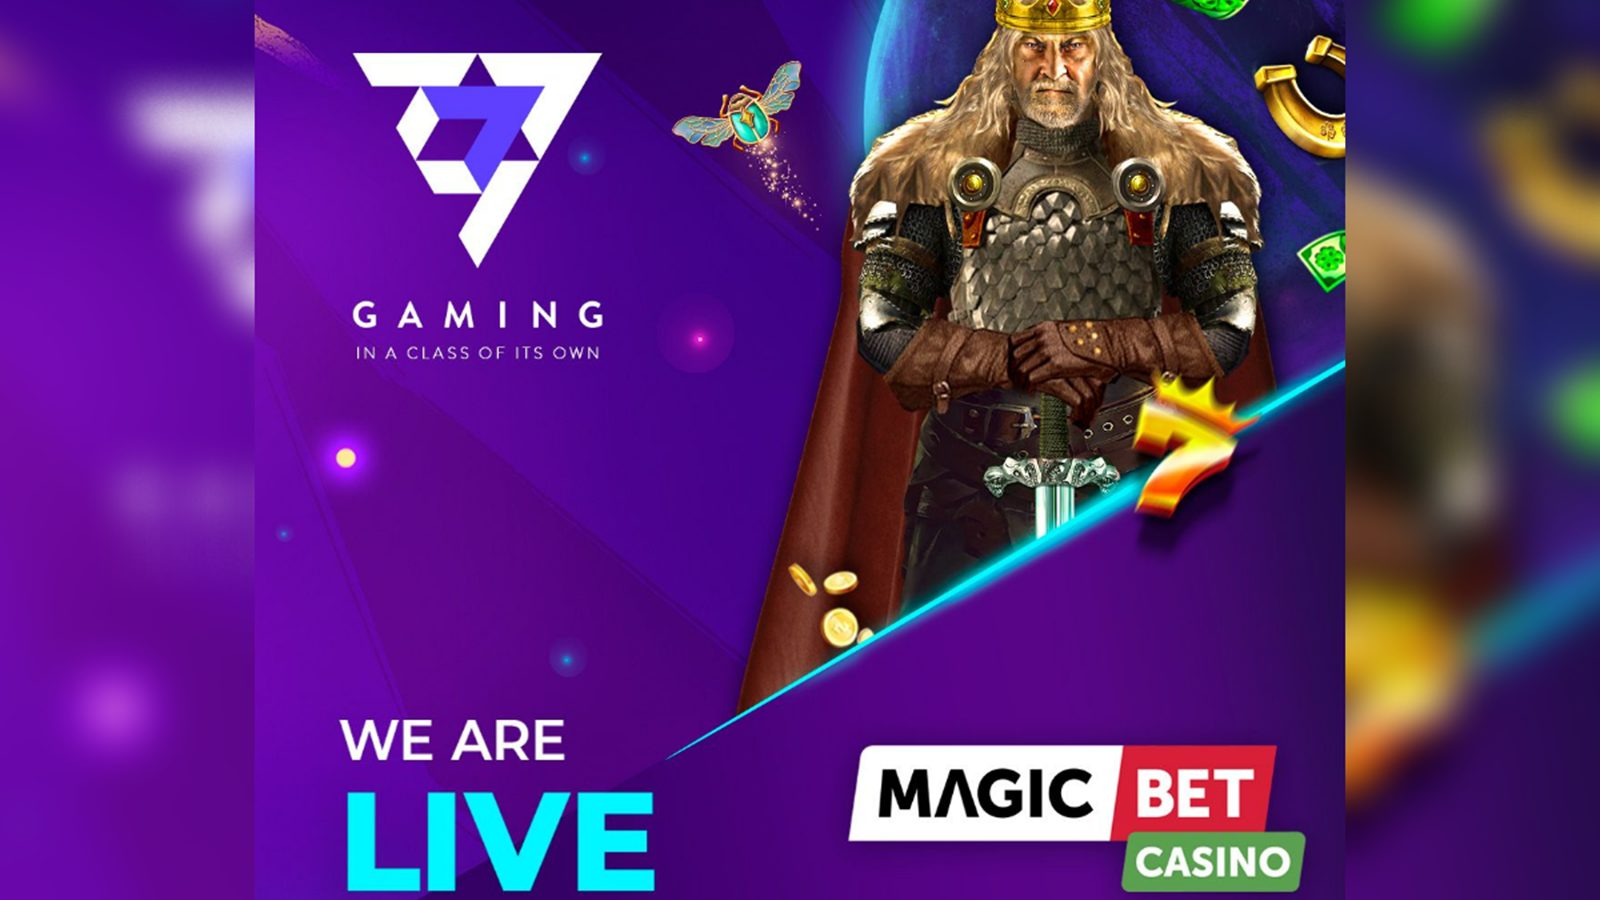 Magicbet Partners with 7777 Gaming